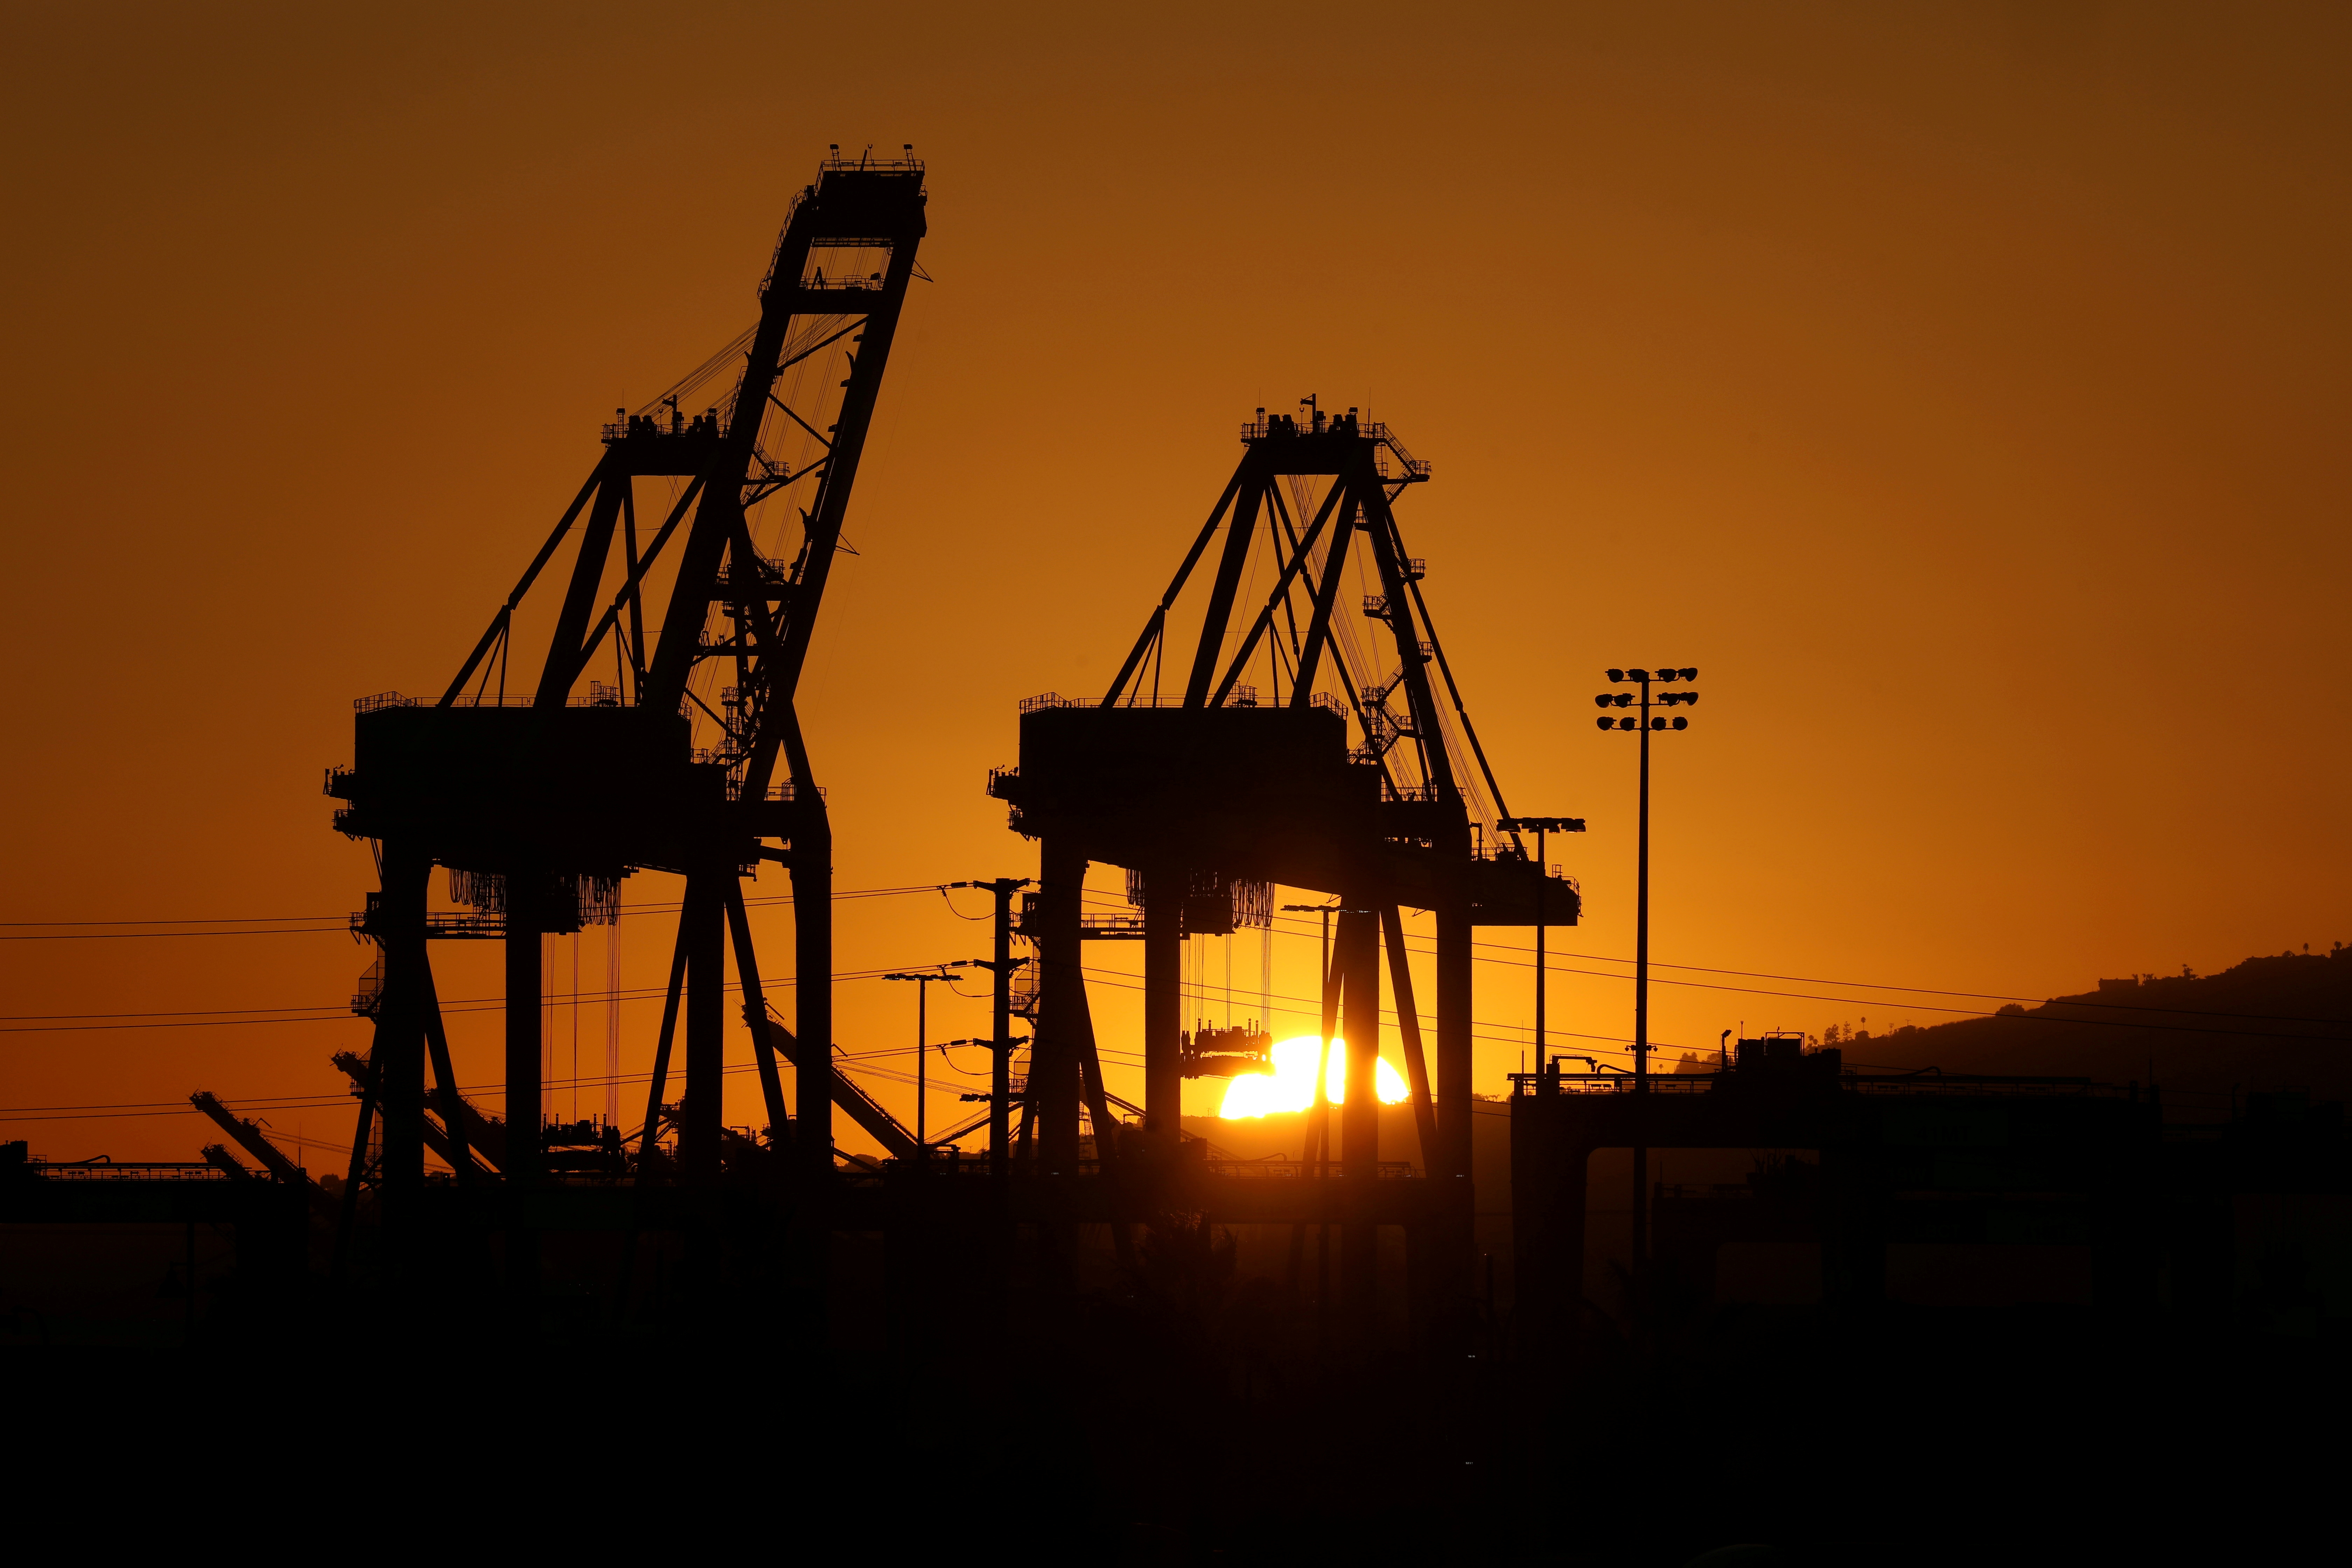 The sun sets behind container cranes at the Port of Los Angeles, California